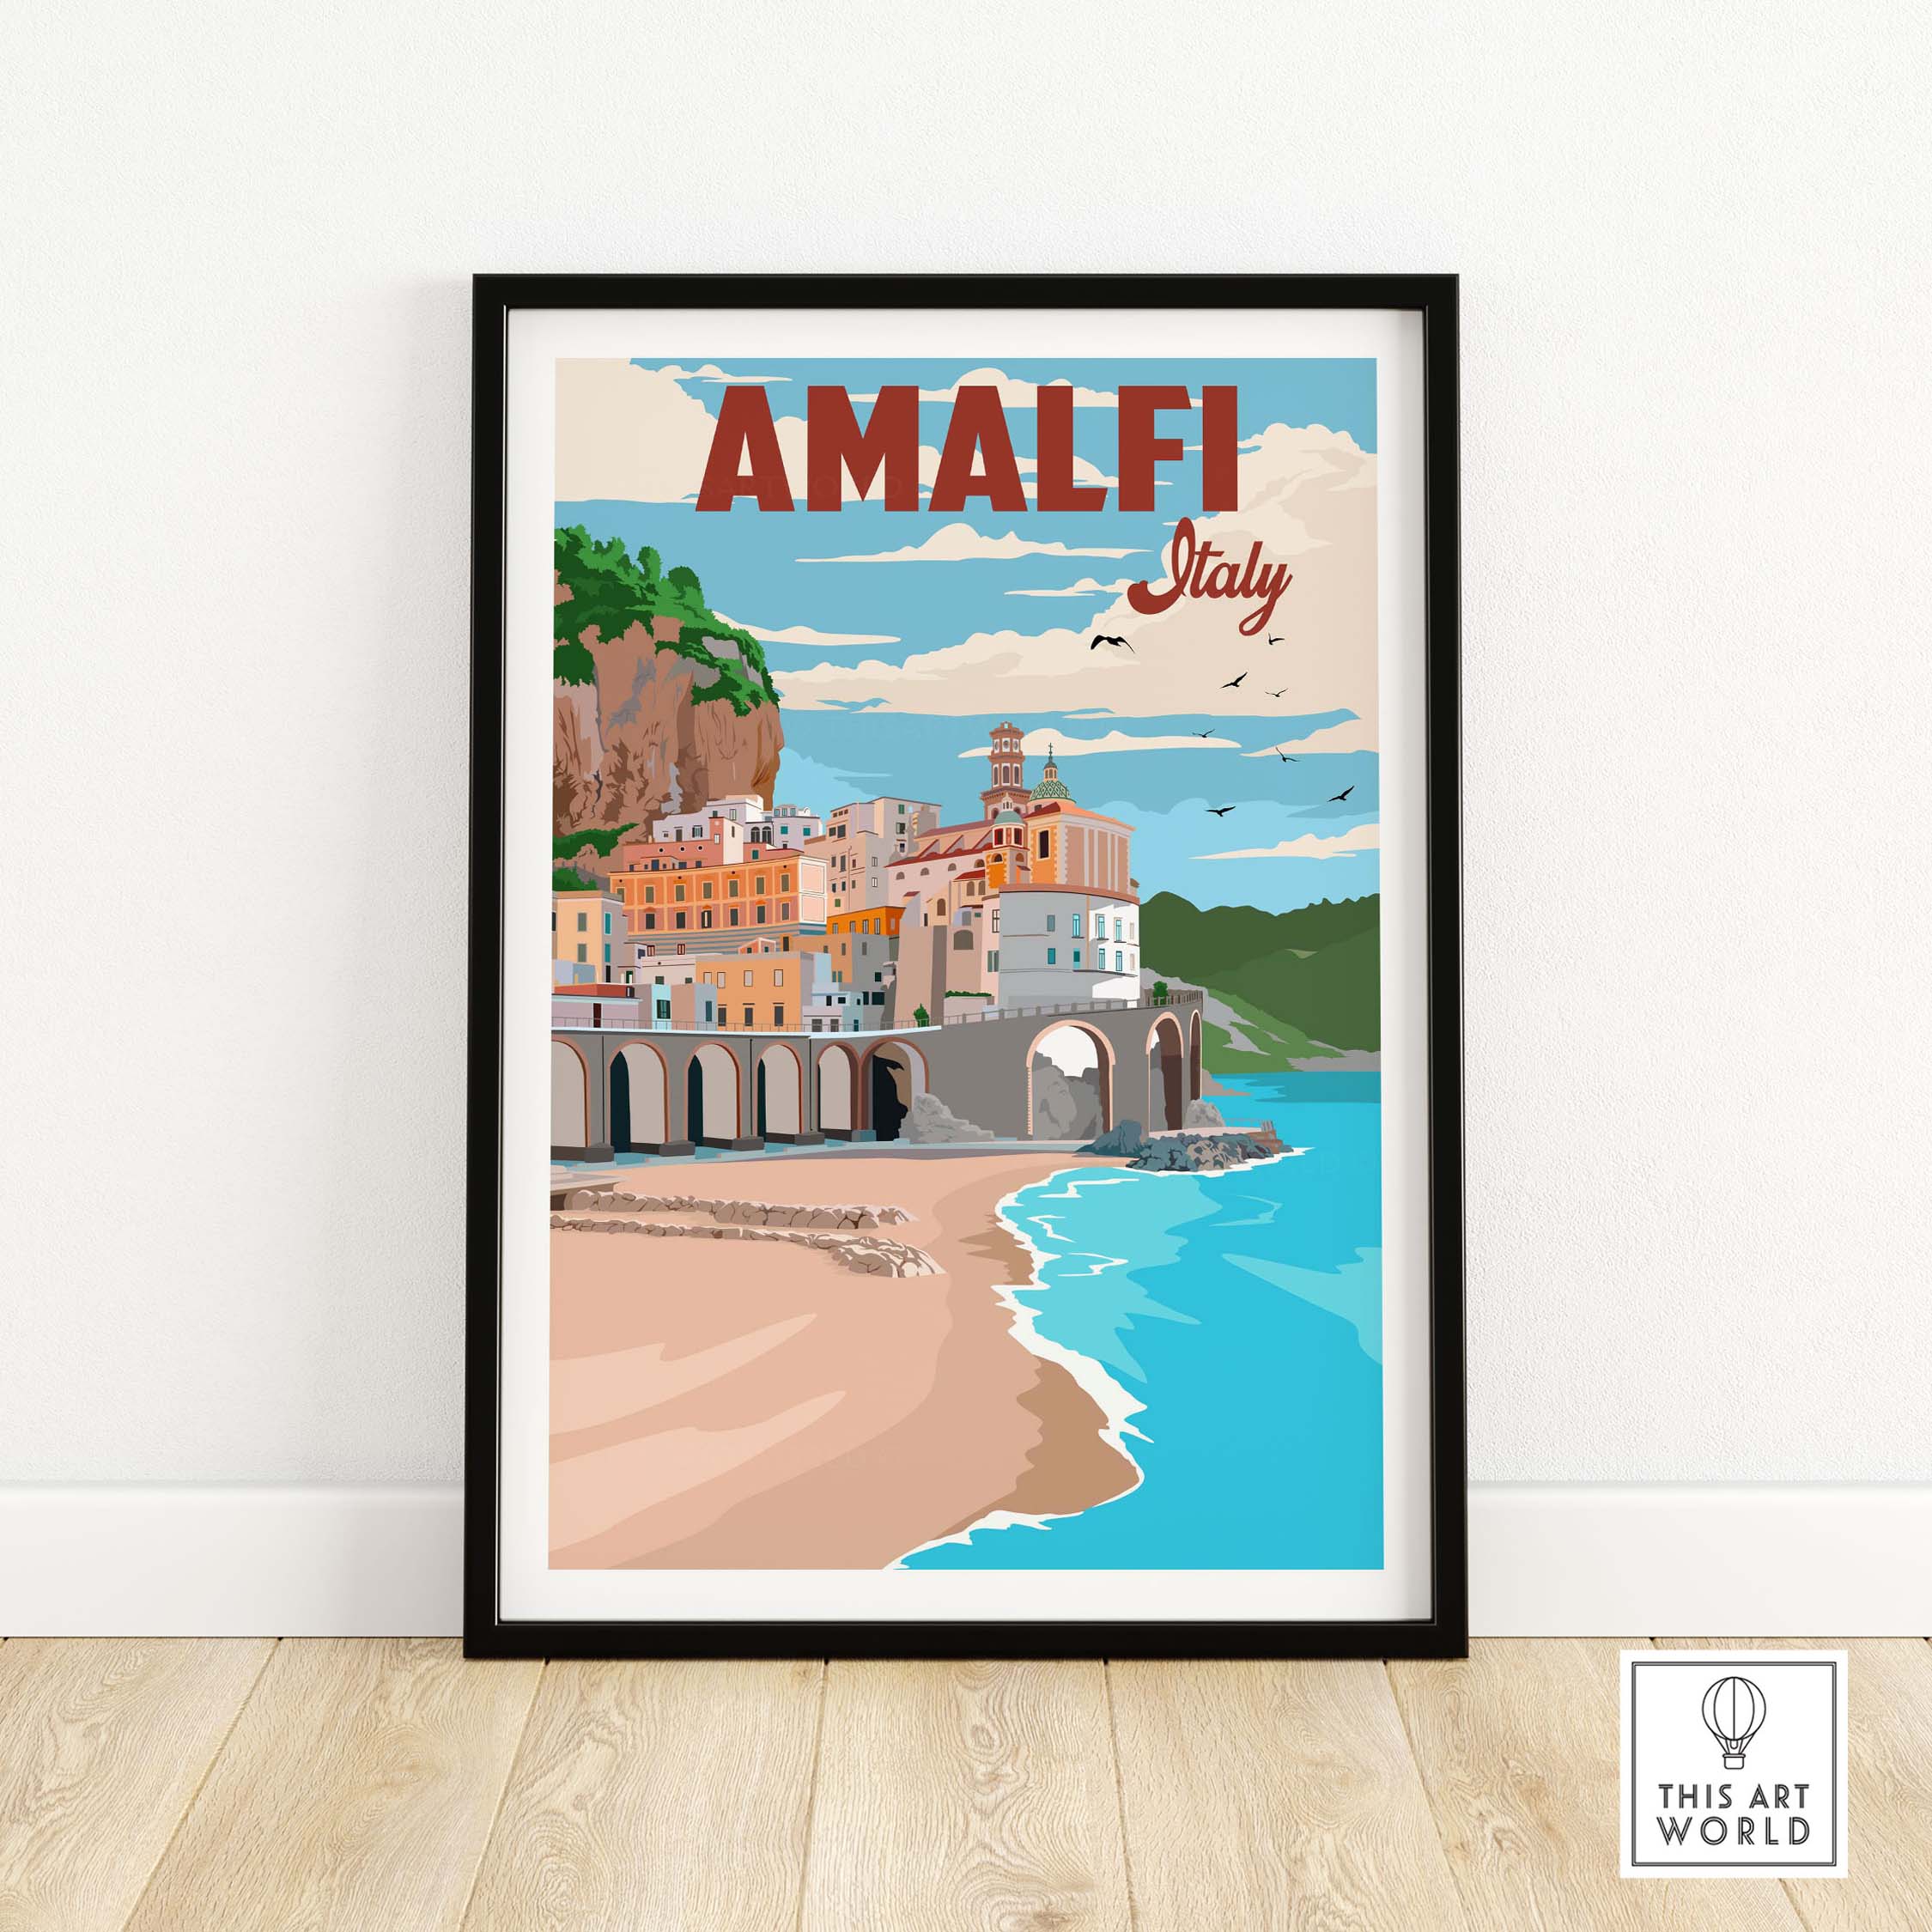 Ydqkxm Italy Vintage Travel Posters Amalfi Coast Aesthetic Landscape  Posters Canvas Wall Art Prints for Wall Decor Room Decor Bedroom Decor  Gifts